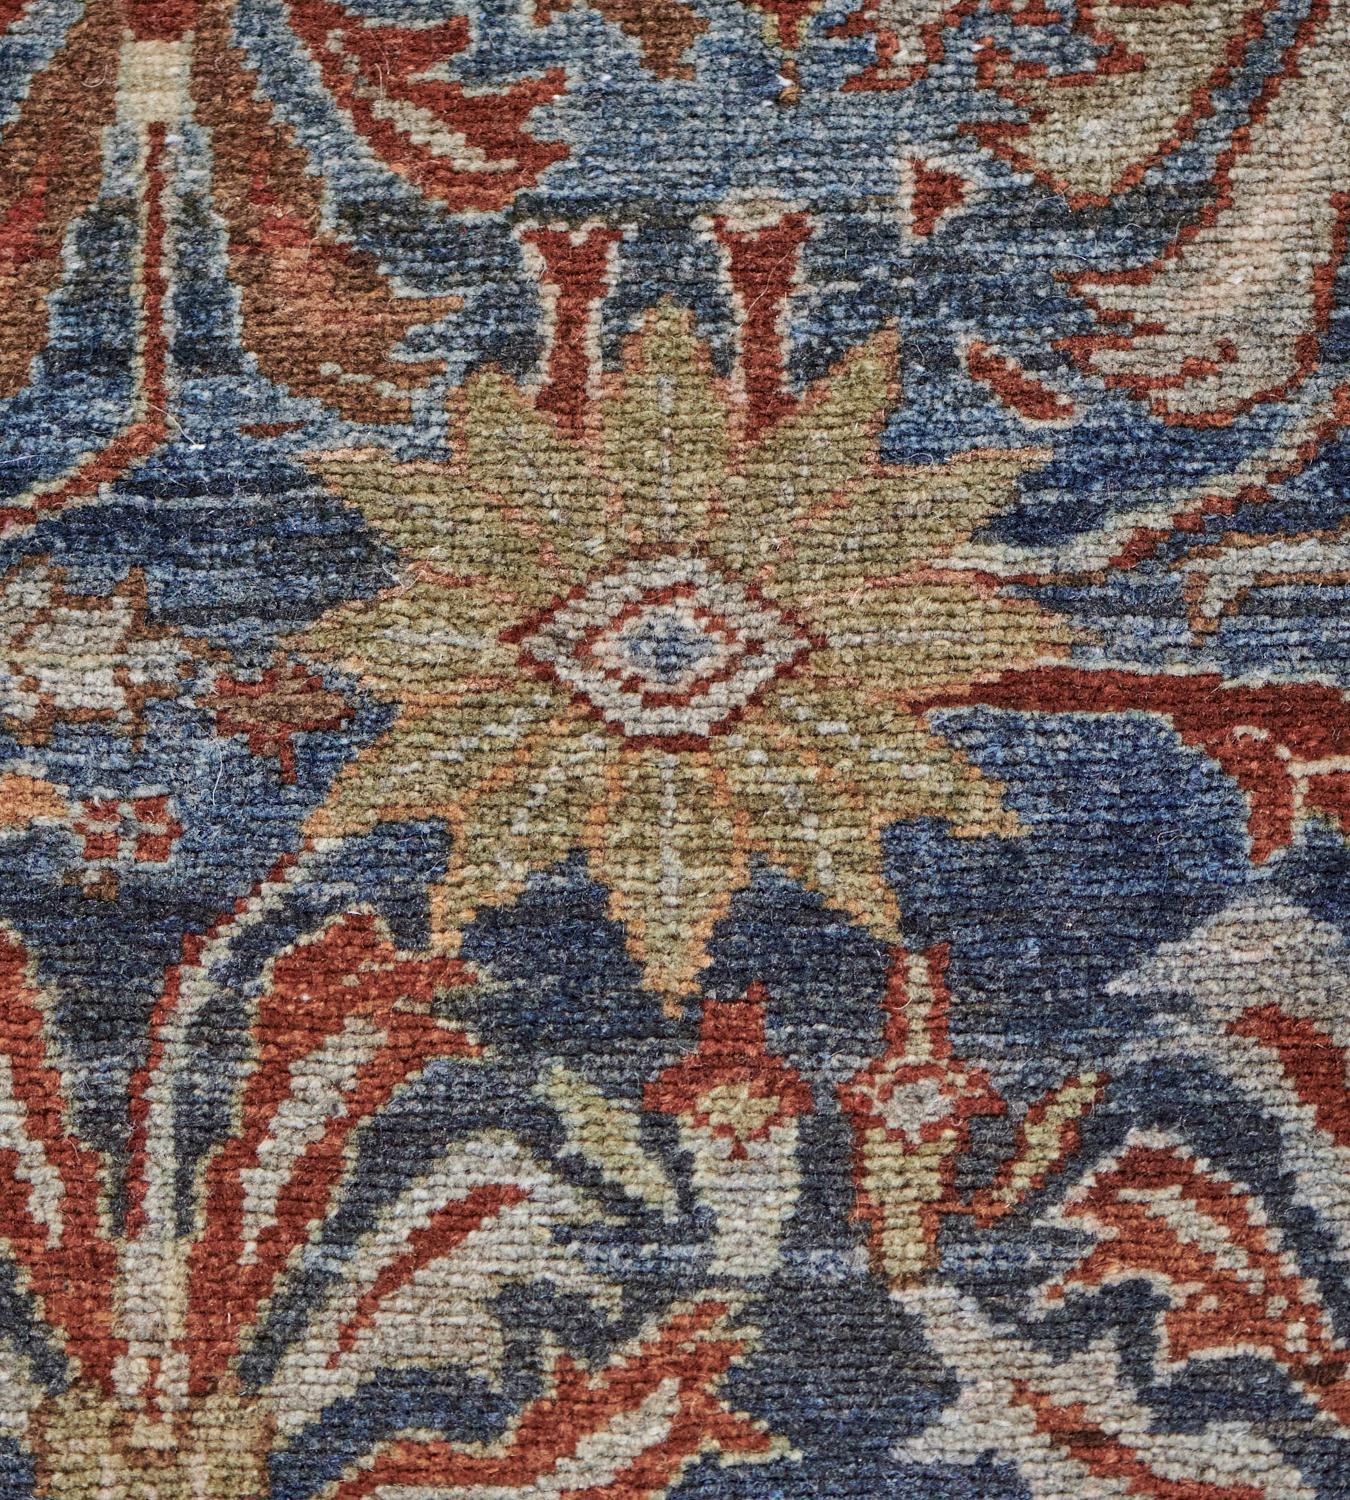 Late 19th Century Handwoven Malayer Wool Rug In Good Condition For Sale In West Hollywood, CA